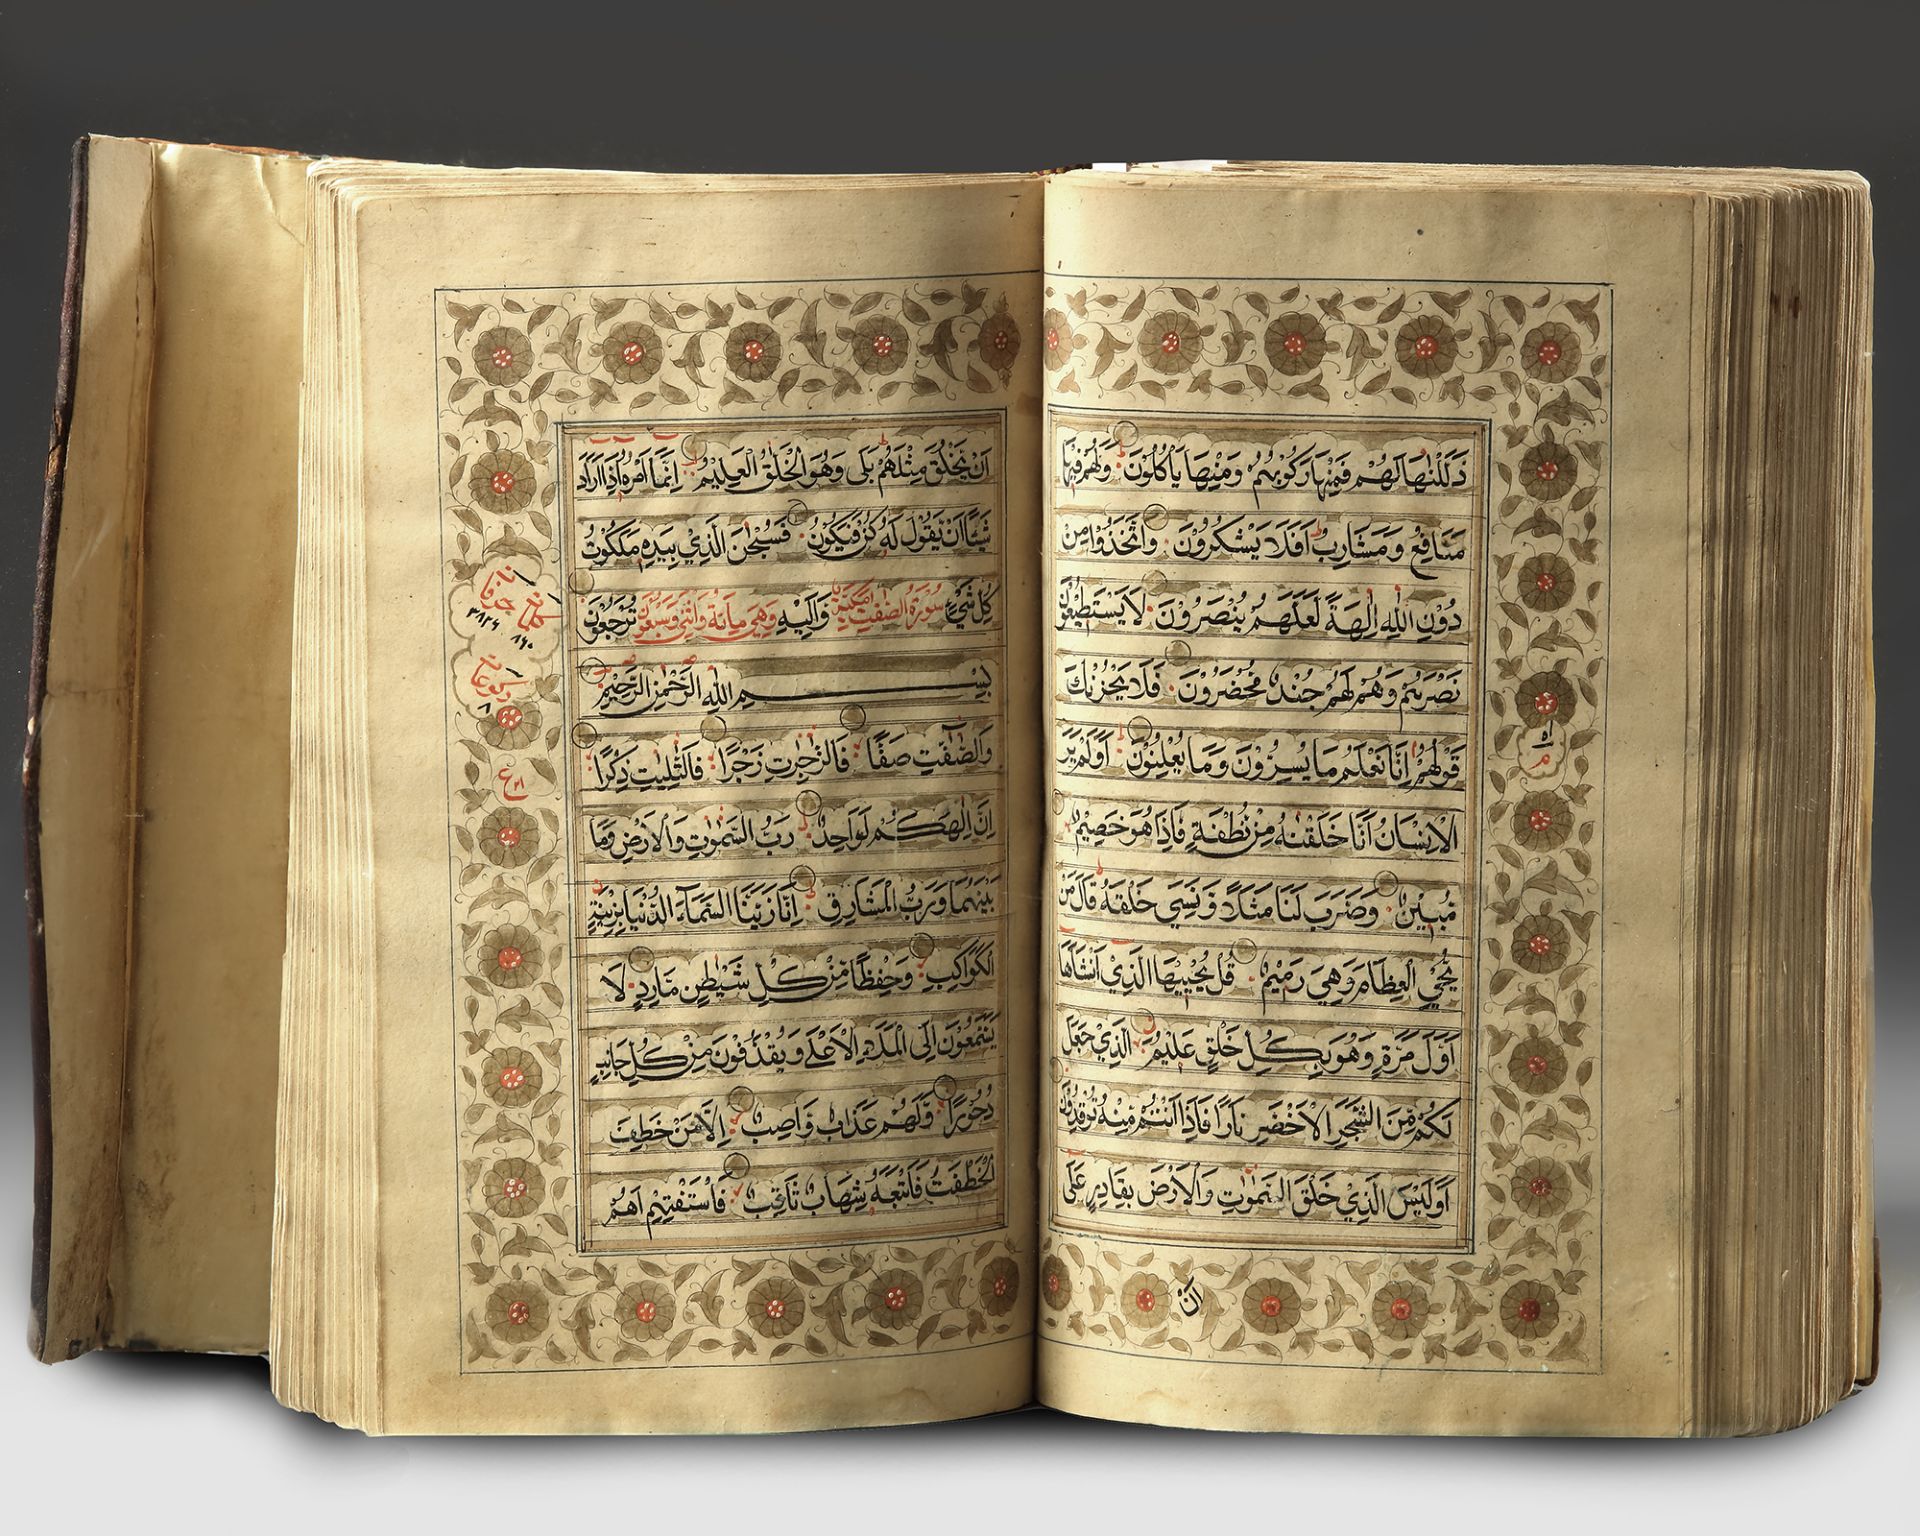 A LEATHER-BOUND QURAN FROM KASHMIR - Image 3 of 4